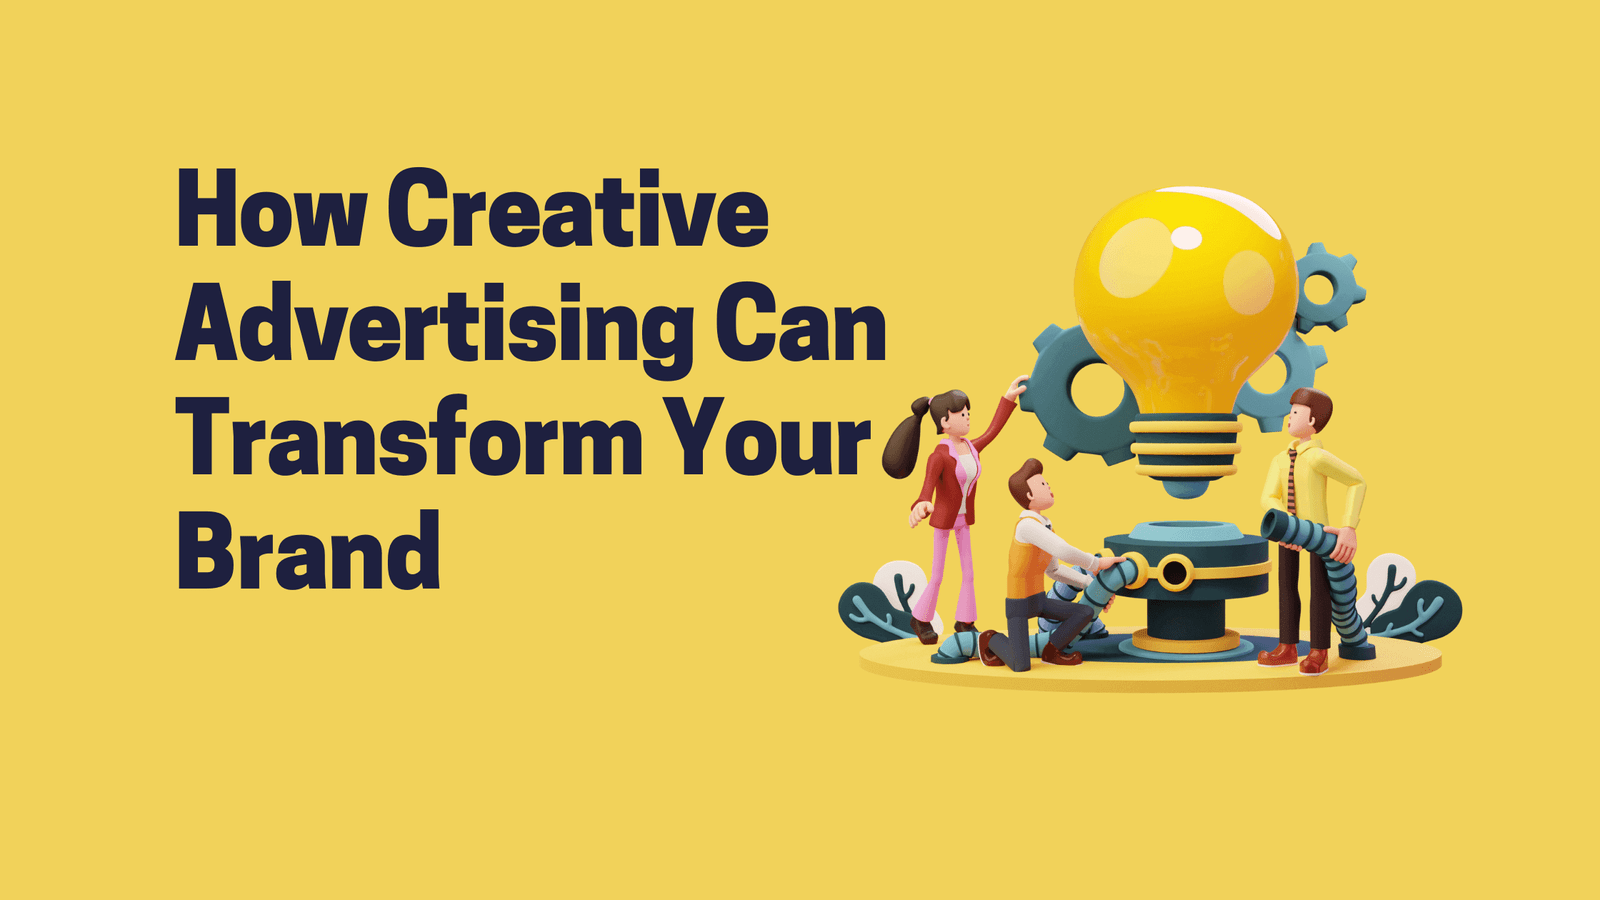 How Creative Advertising Can Transform Your Brand